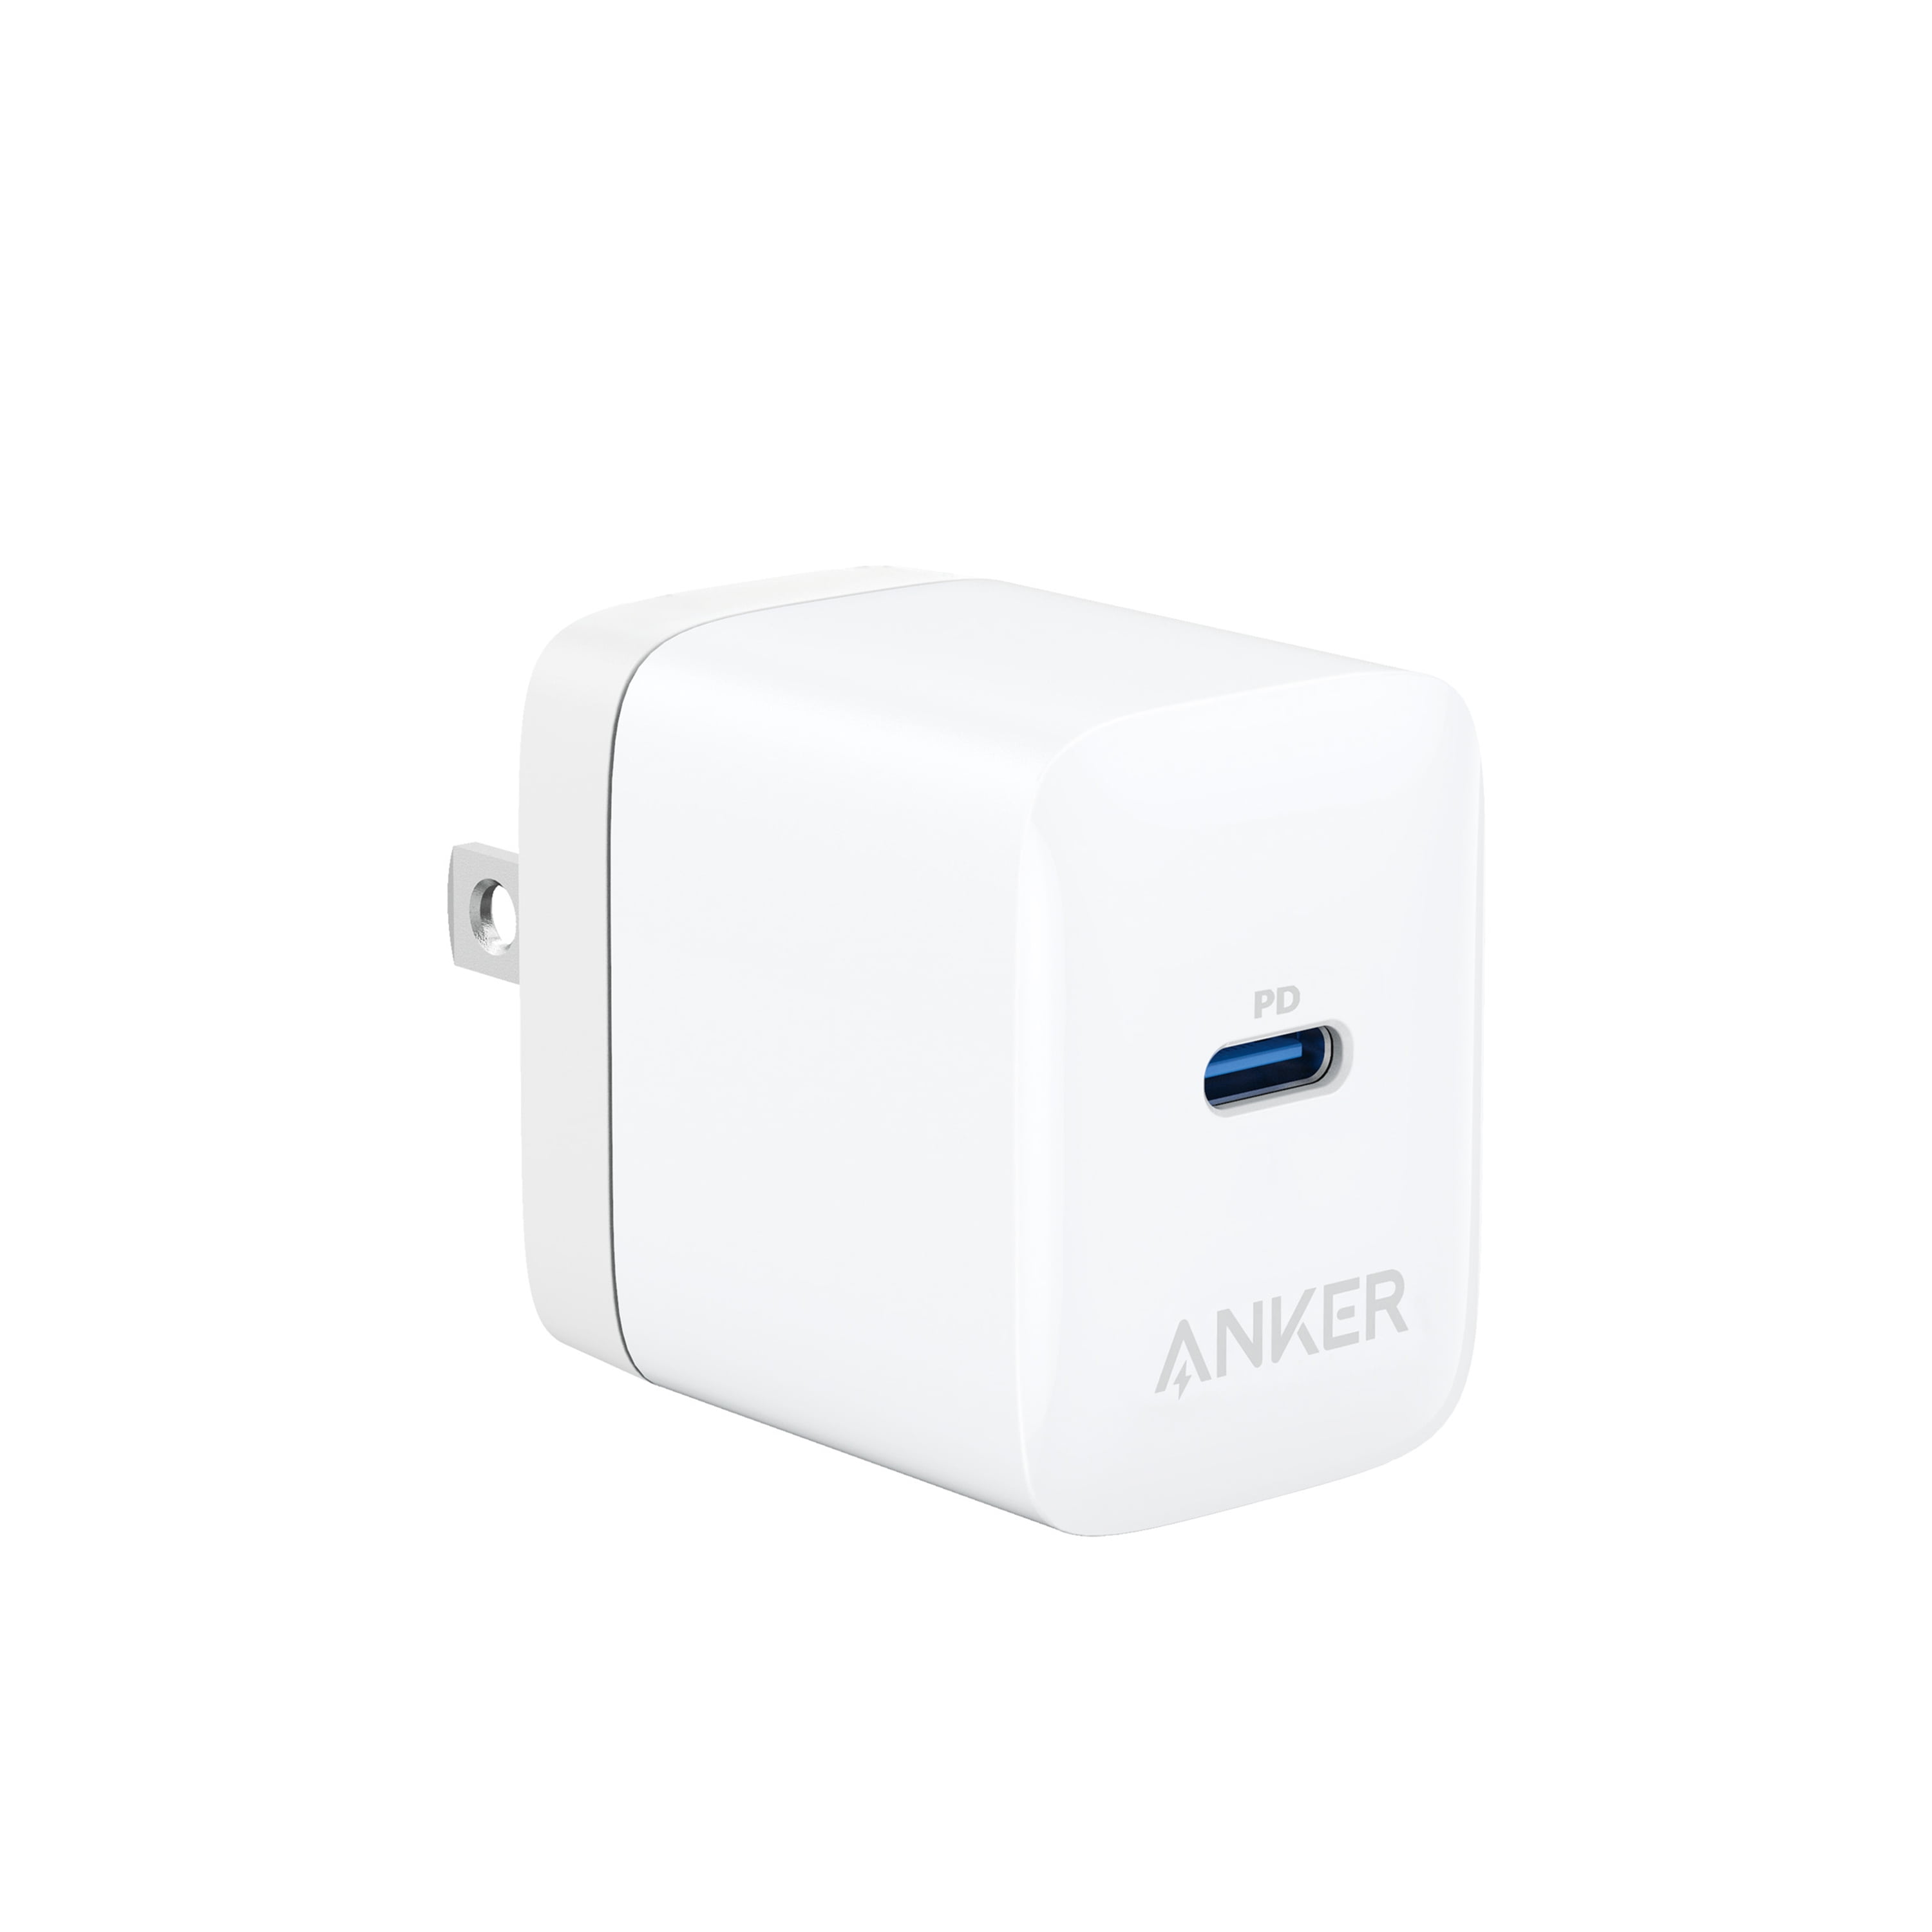 USB C Charger, Anker Nano II 65W II Fast Charger Adapter, Foldable Compact Charger Walmart.com